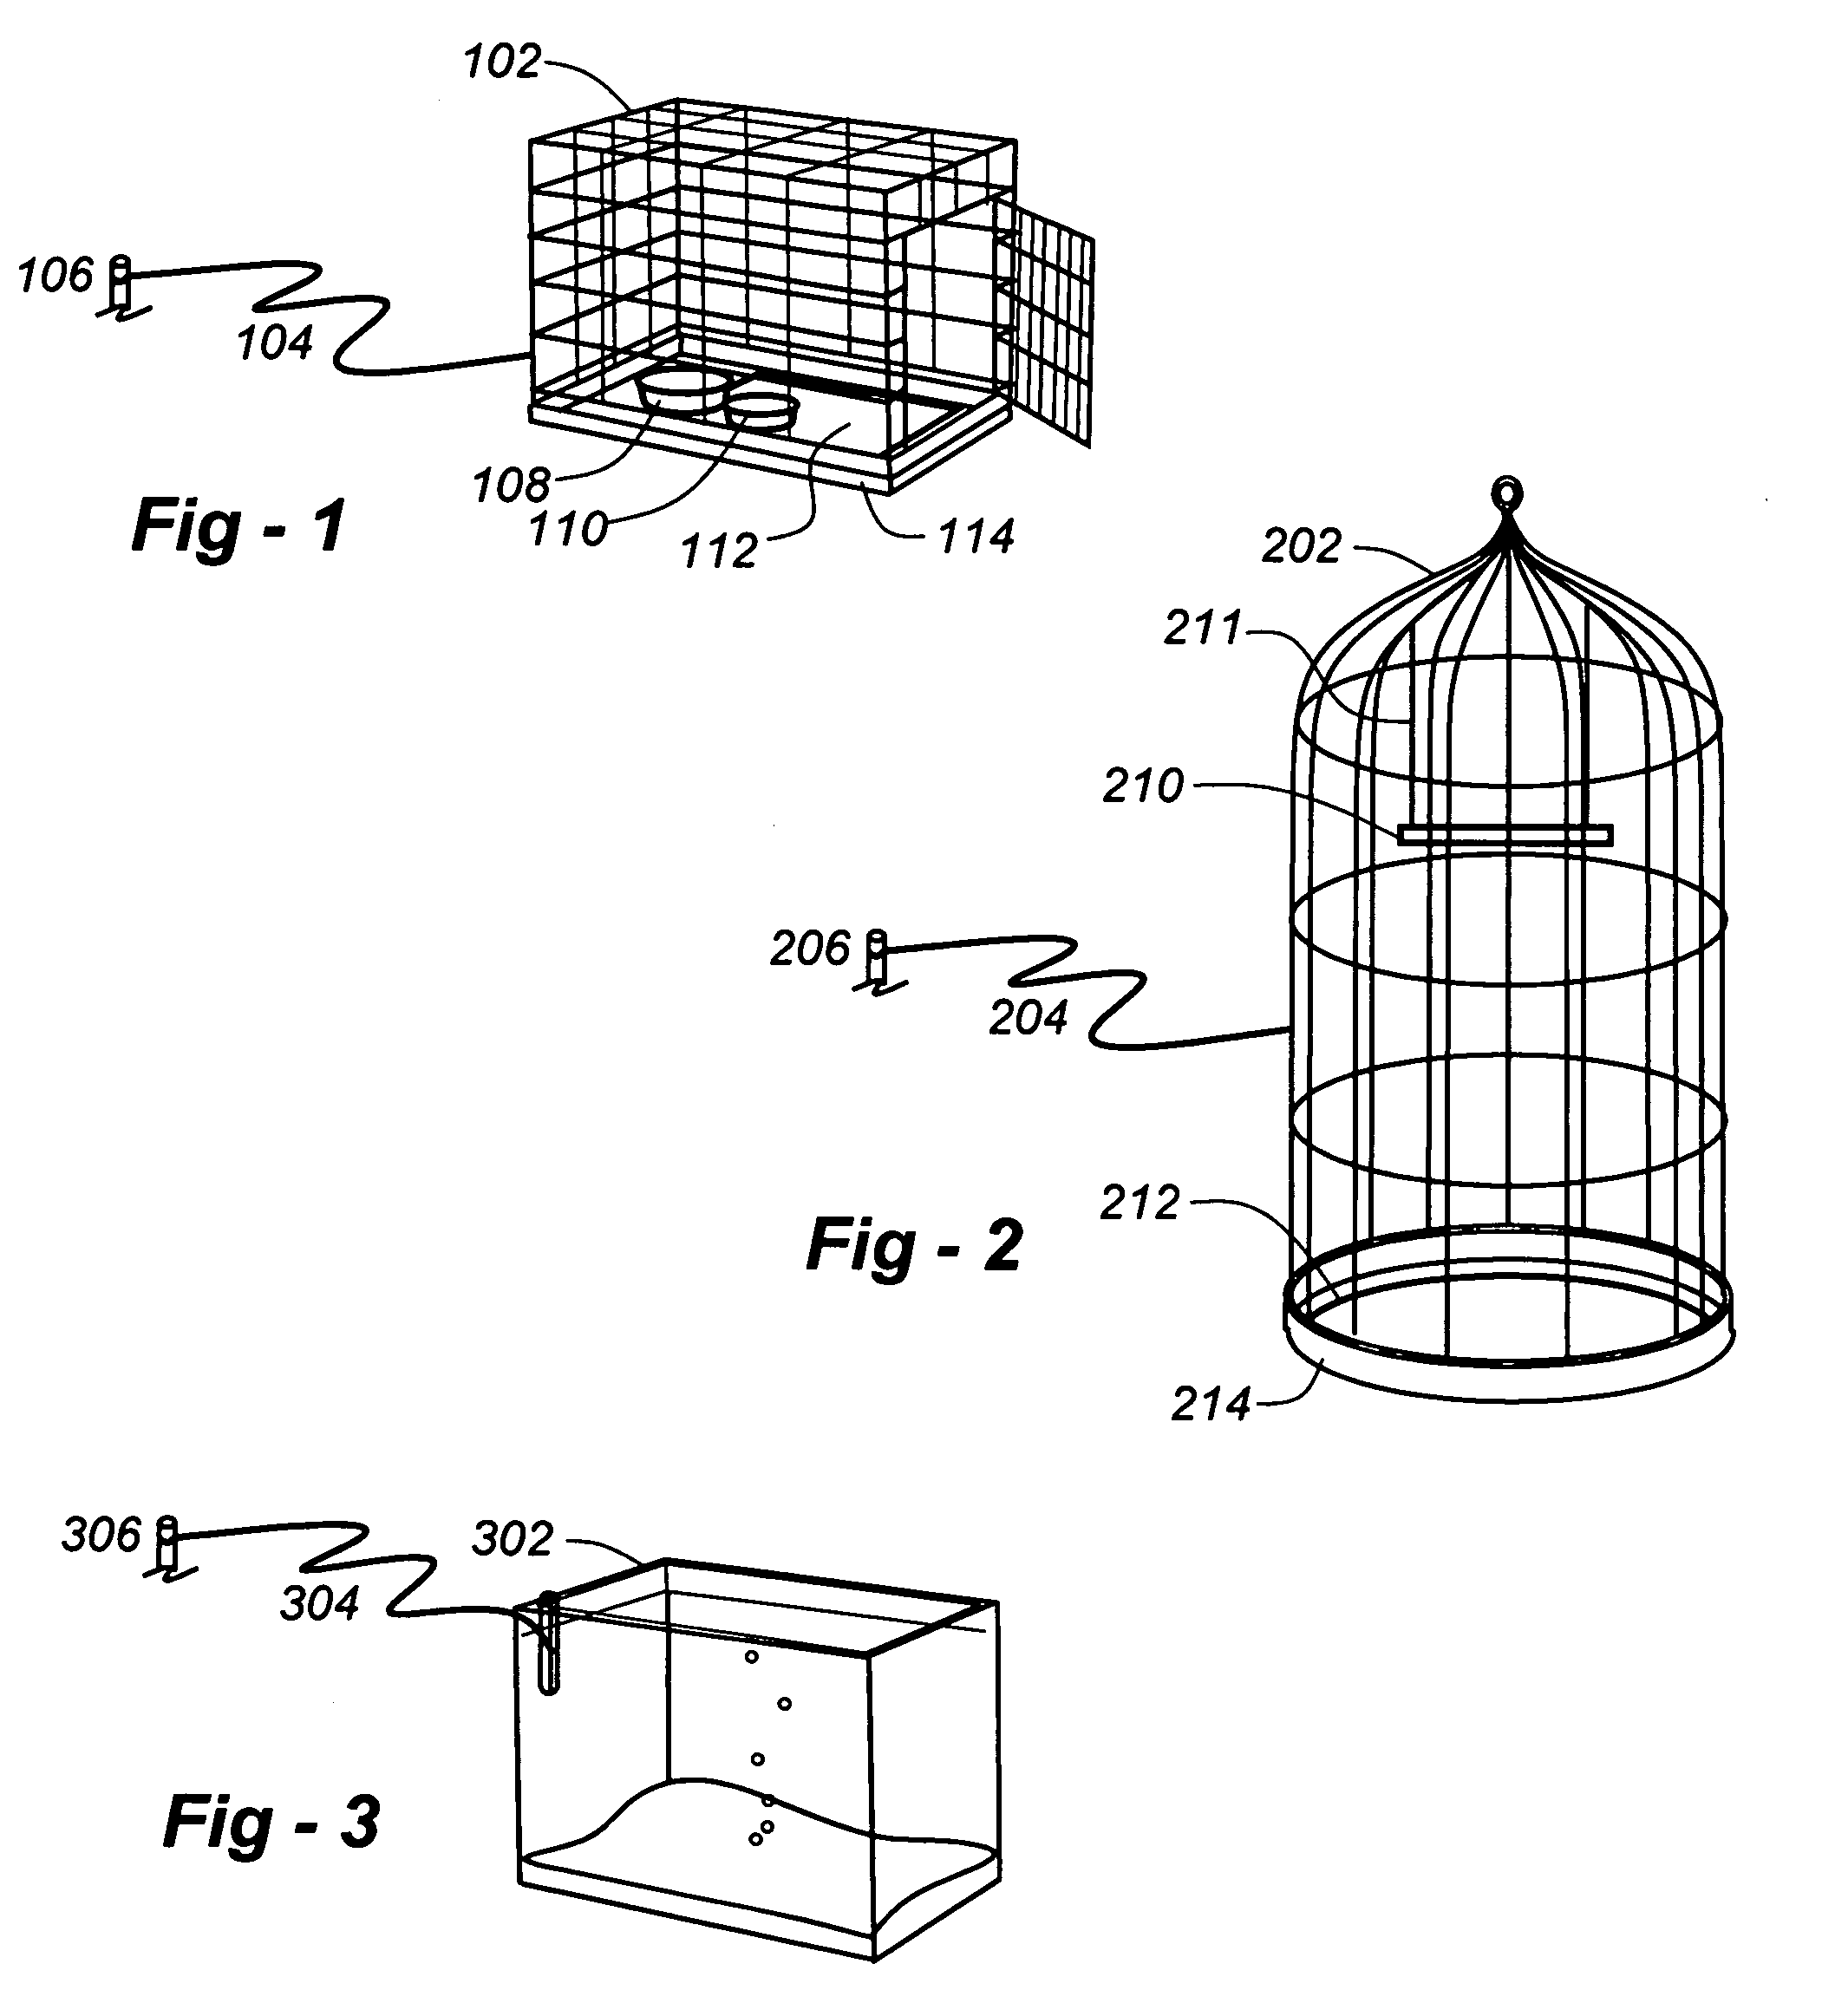 Systems and methods for electrically grounding animals